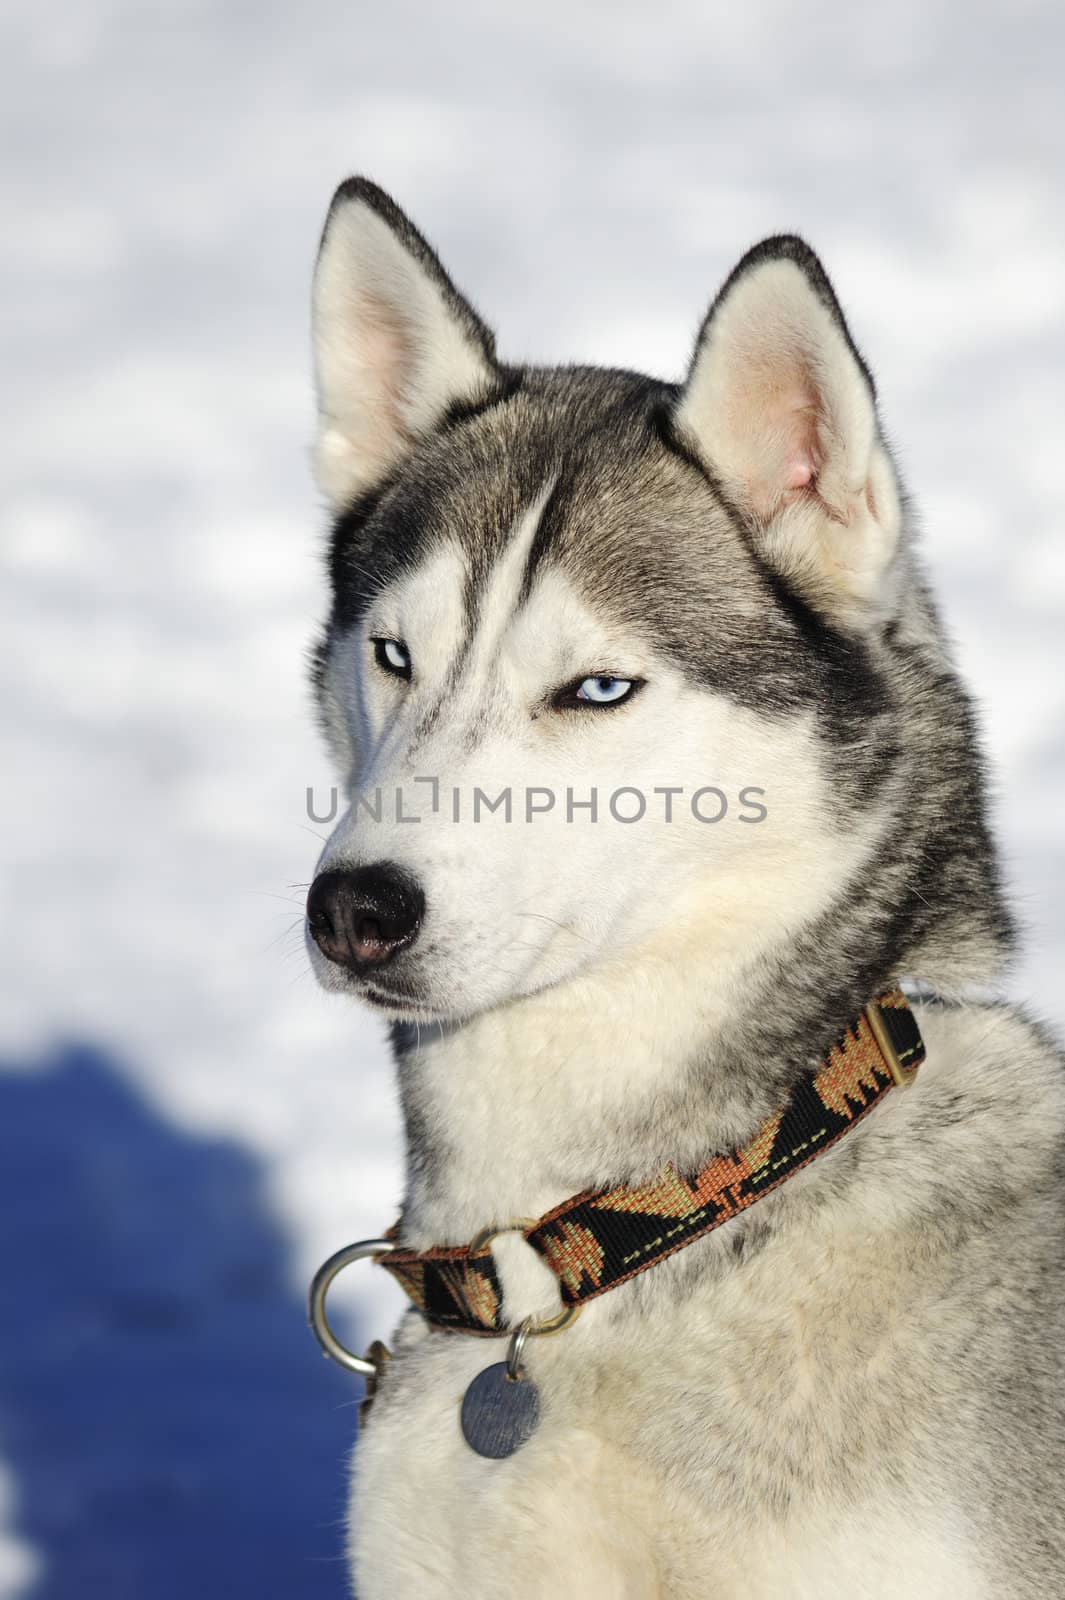 Close up of a bored-looking malamute (breed of sled dog) in the snow